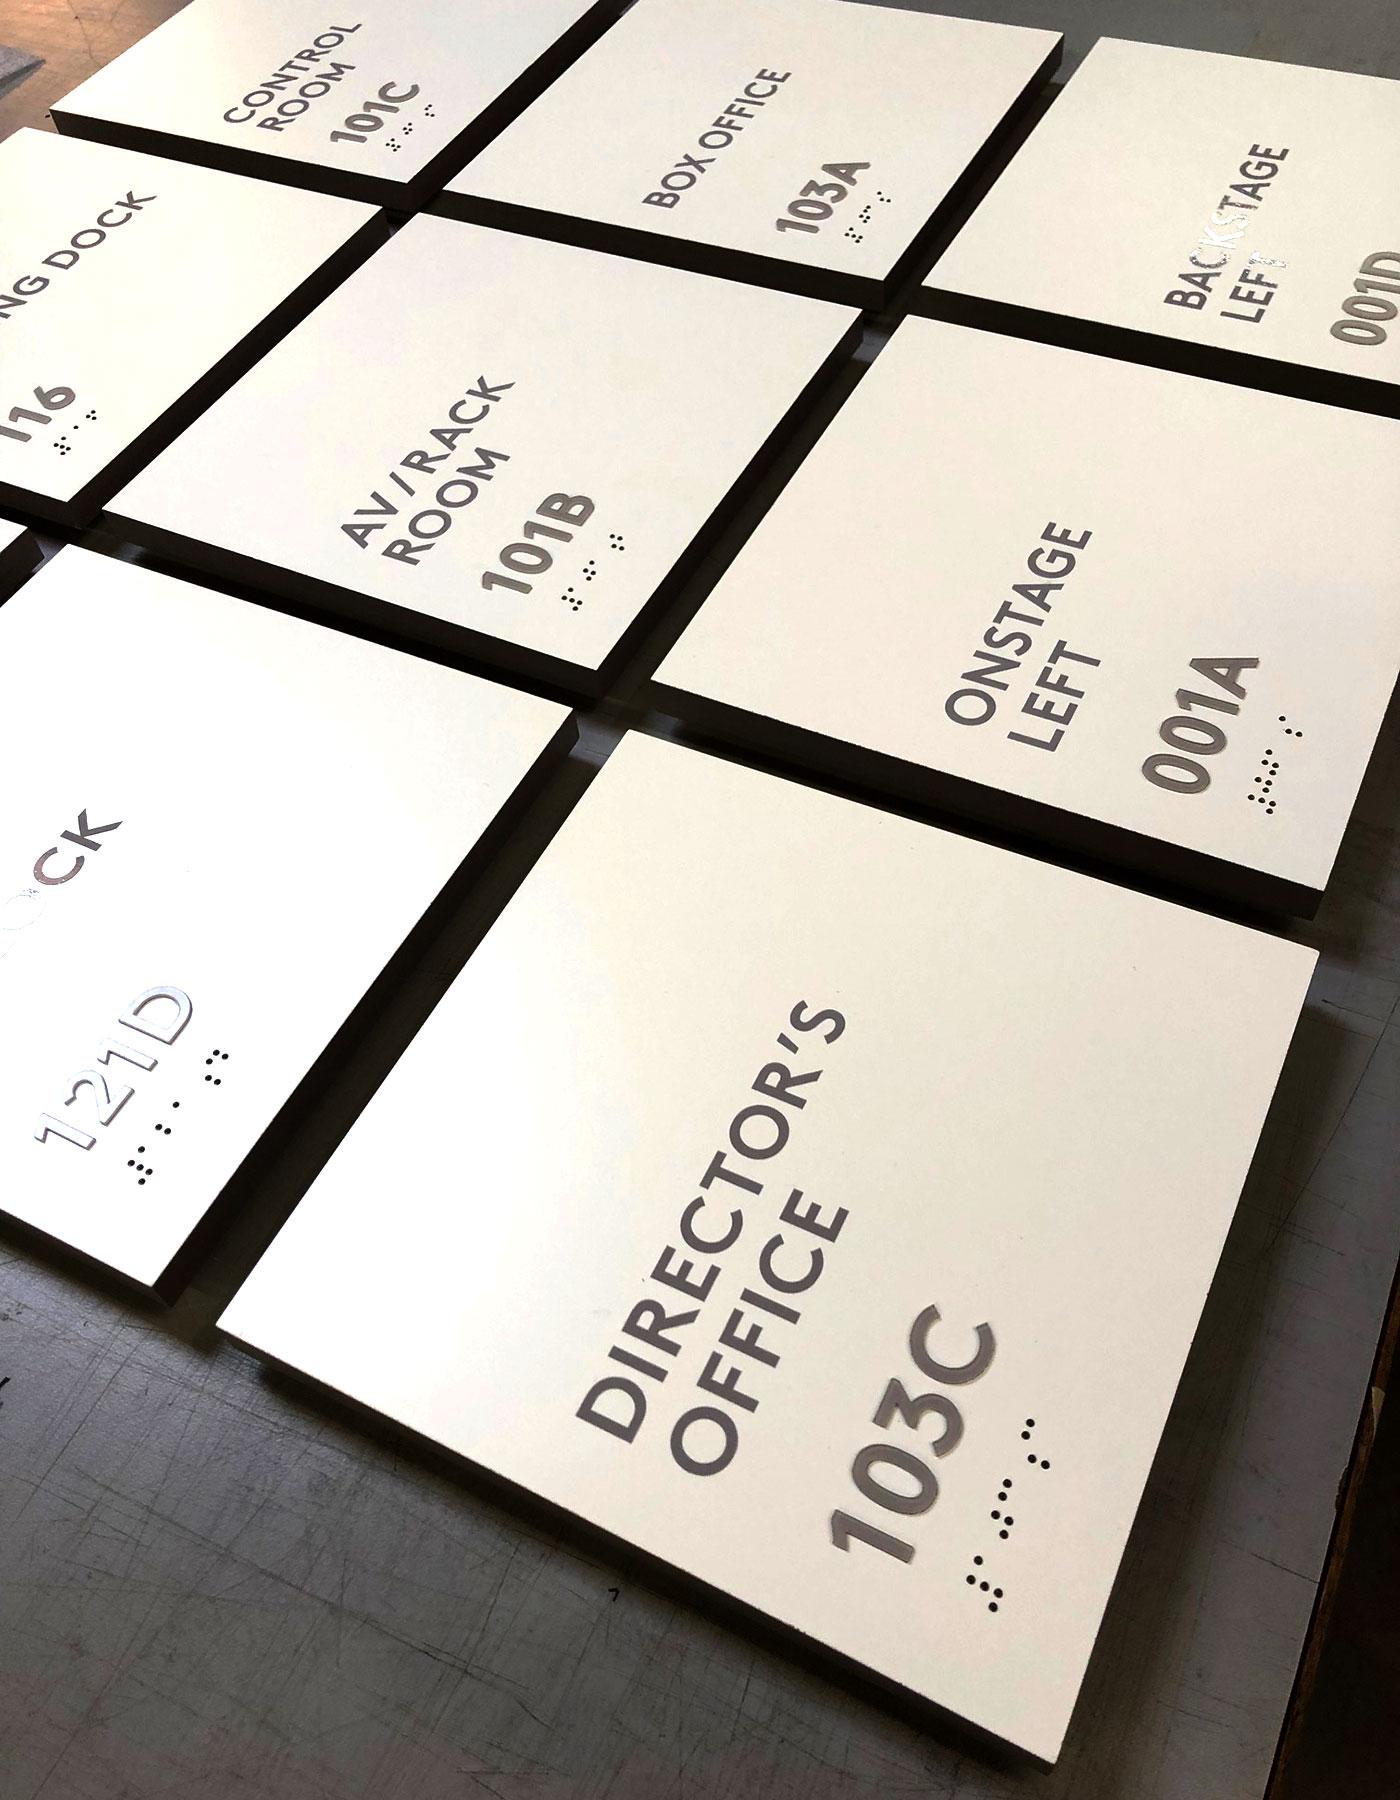 Acrylic panels will be fabricated with Clear Grade II Braille in compliance with ADA Code consistent with the overall color palette throughout the entire facility.